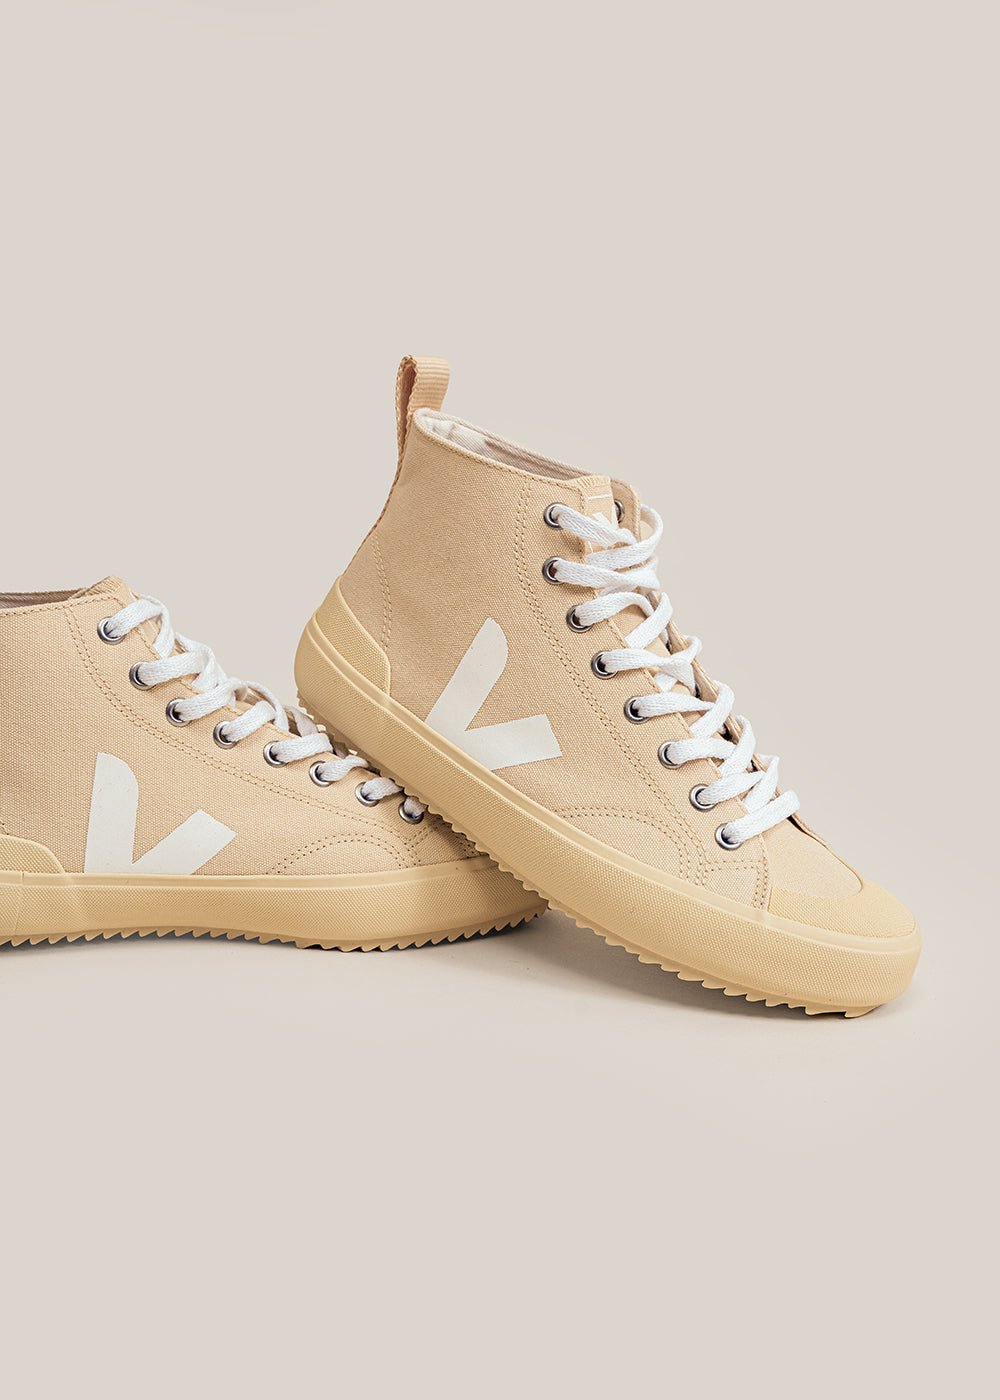 Veja Butter Nova High Sneaker - New Classics Studios Sustainable Ethical Fashion Canada